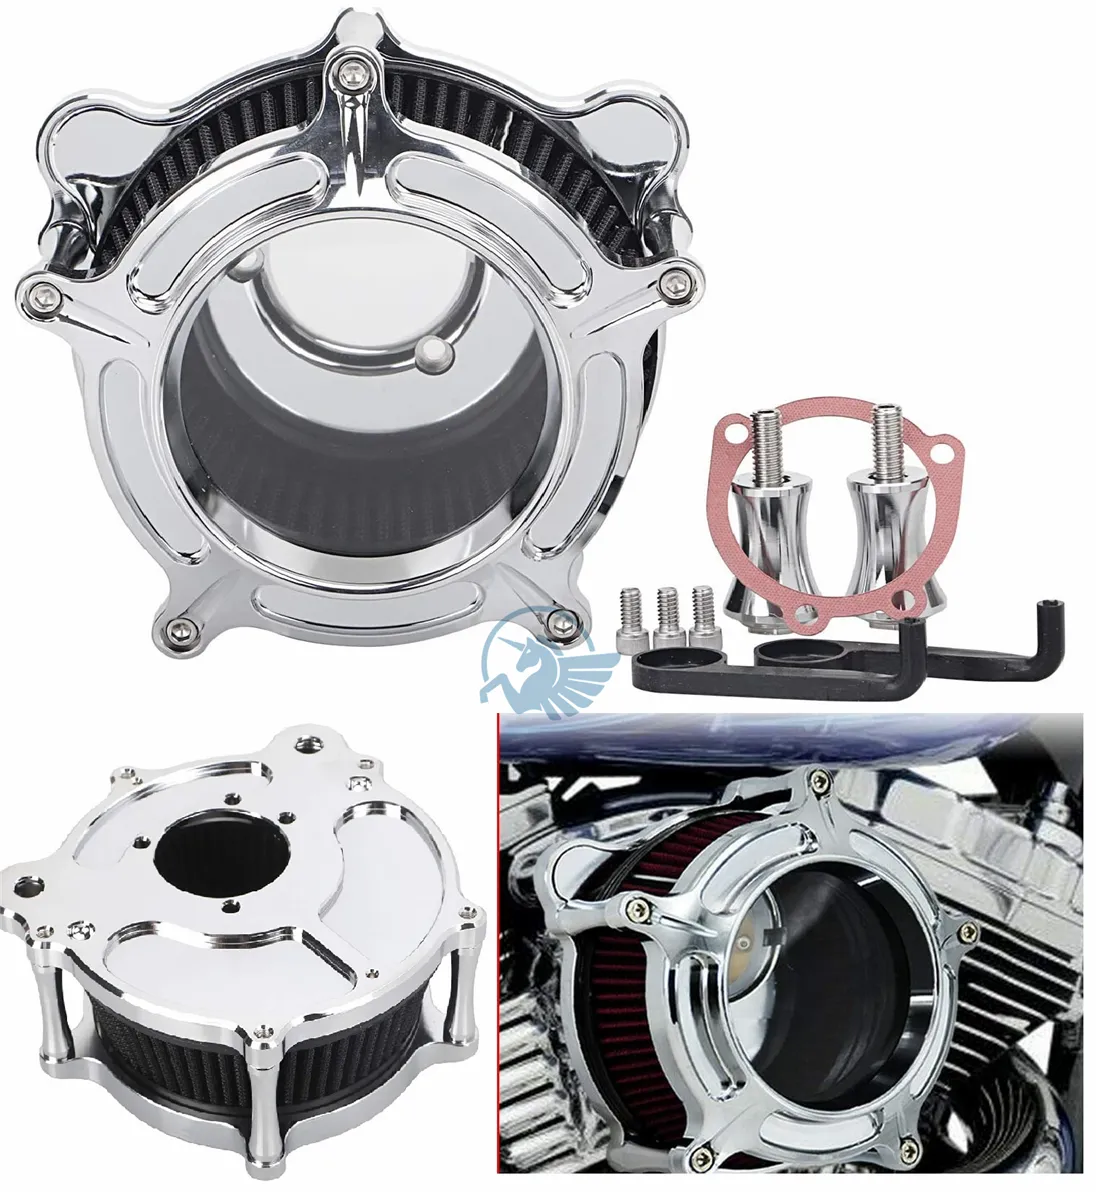 CNC aluminum Turbine Air Cleaner Intake Filter for Harley touring CVO Street Bob Ultra Electra glide Road King Softail Dyna X48